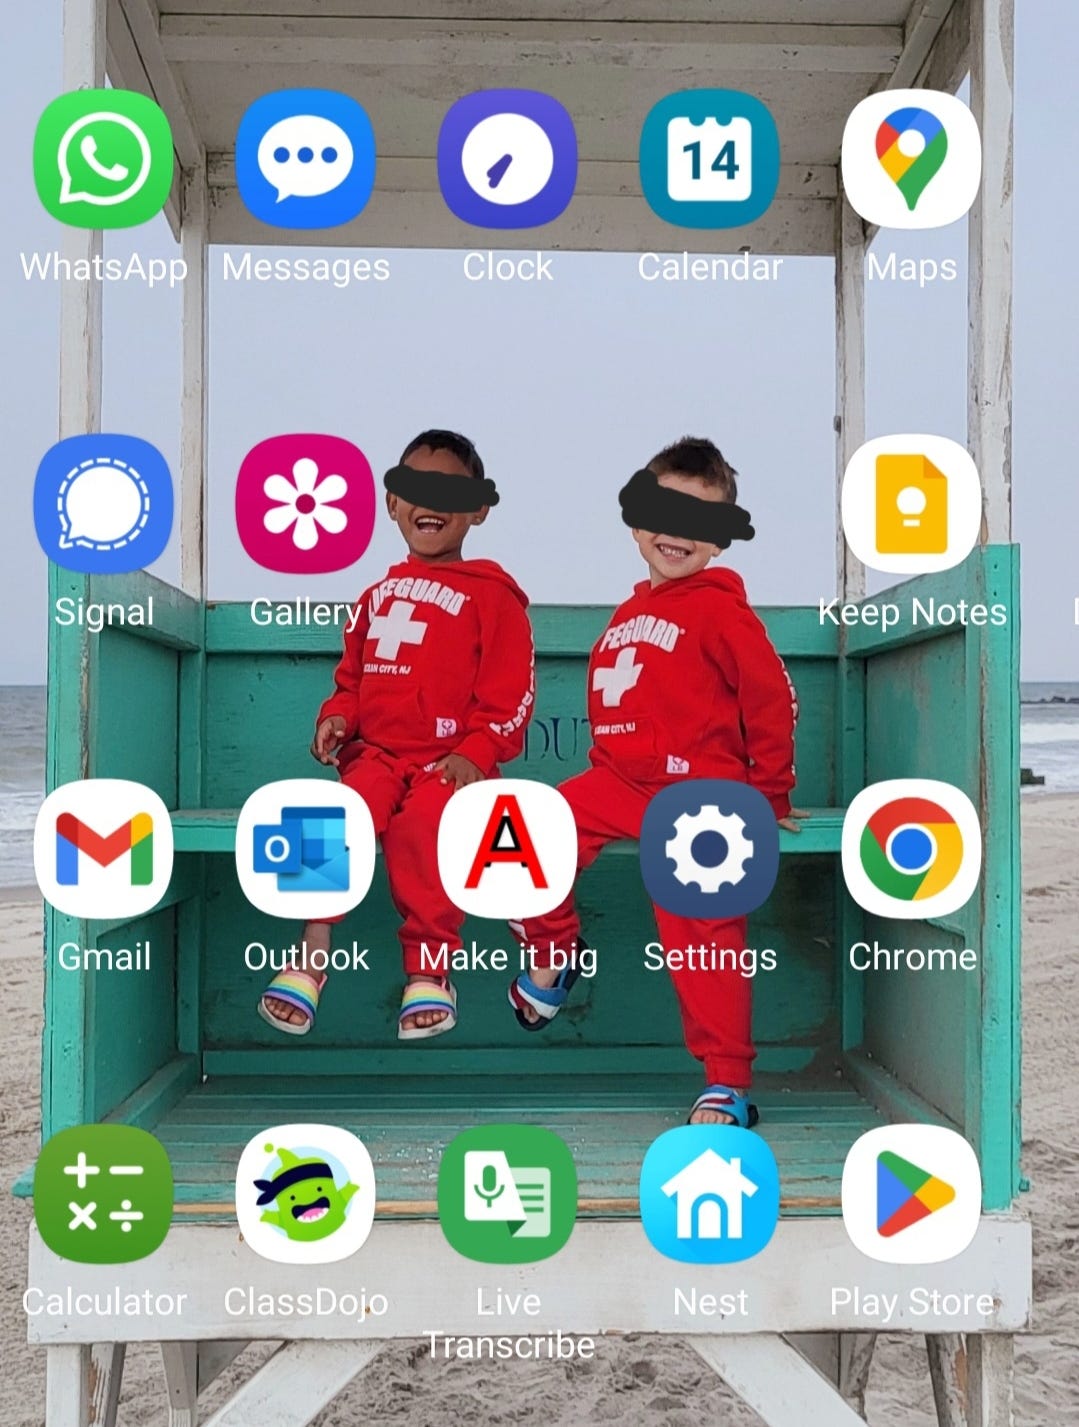 ID: Screenshot of my phone’s home screen, with two apps missing from the center, revealing the faces of two young boys smiling in matching red sweatsuits, sitting in a green and white lifeguard stand. Their eyes are blacked out for privacy.